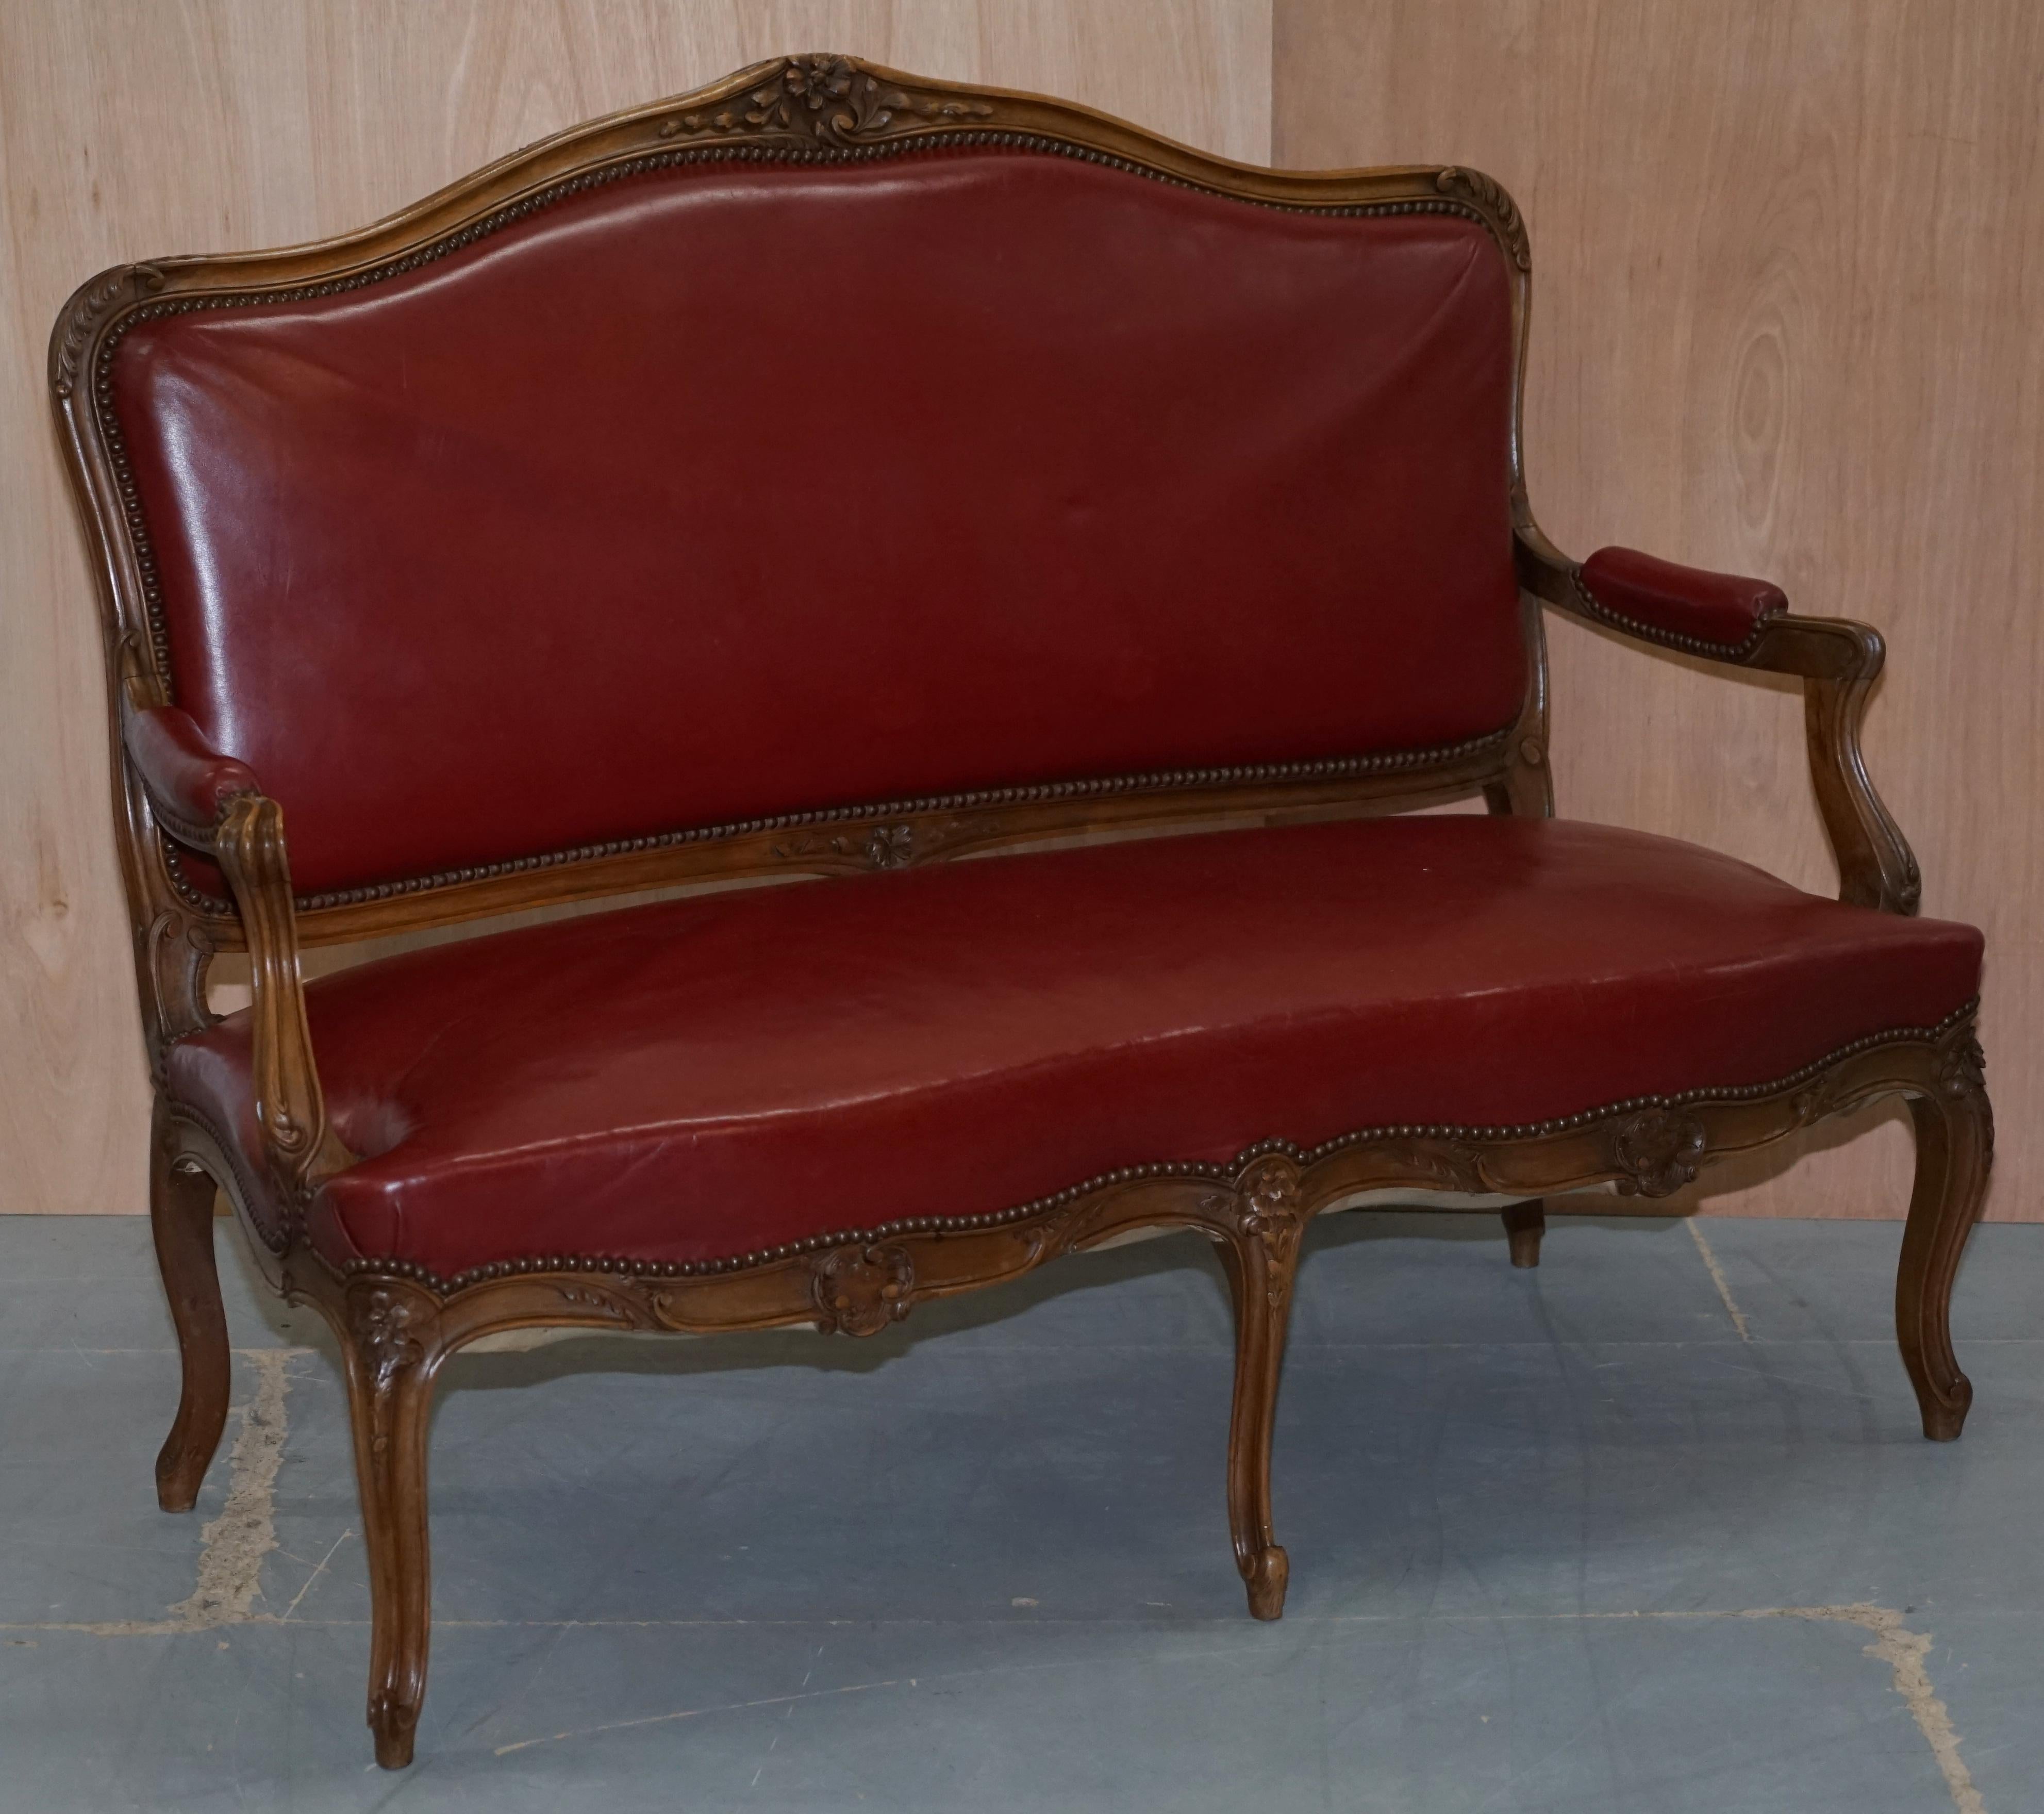 We are delighted to offer for sale this Oxblood leather walnut framed French XV style suite

A very good looking and well made salon suite, the Walnut frames have been beautifully hand carved and look lovely from all angles, the leather upholstery